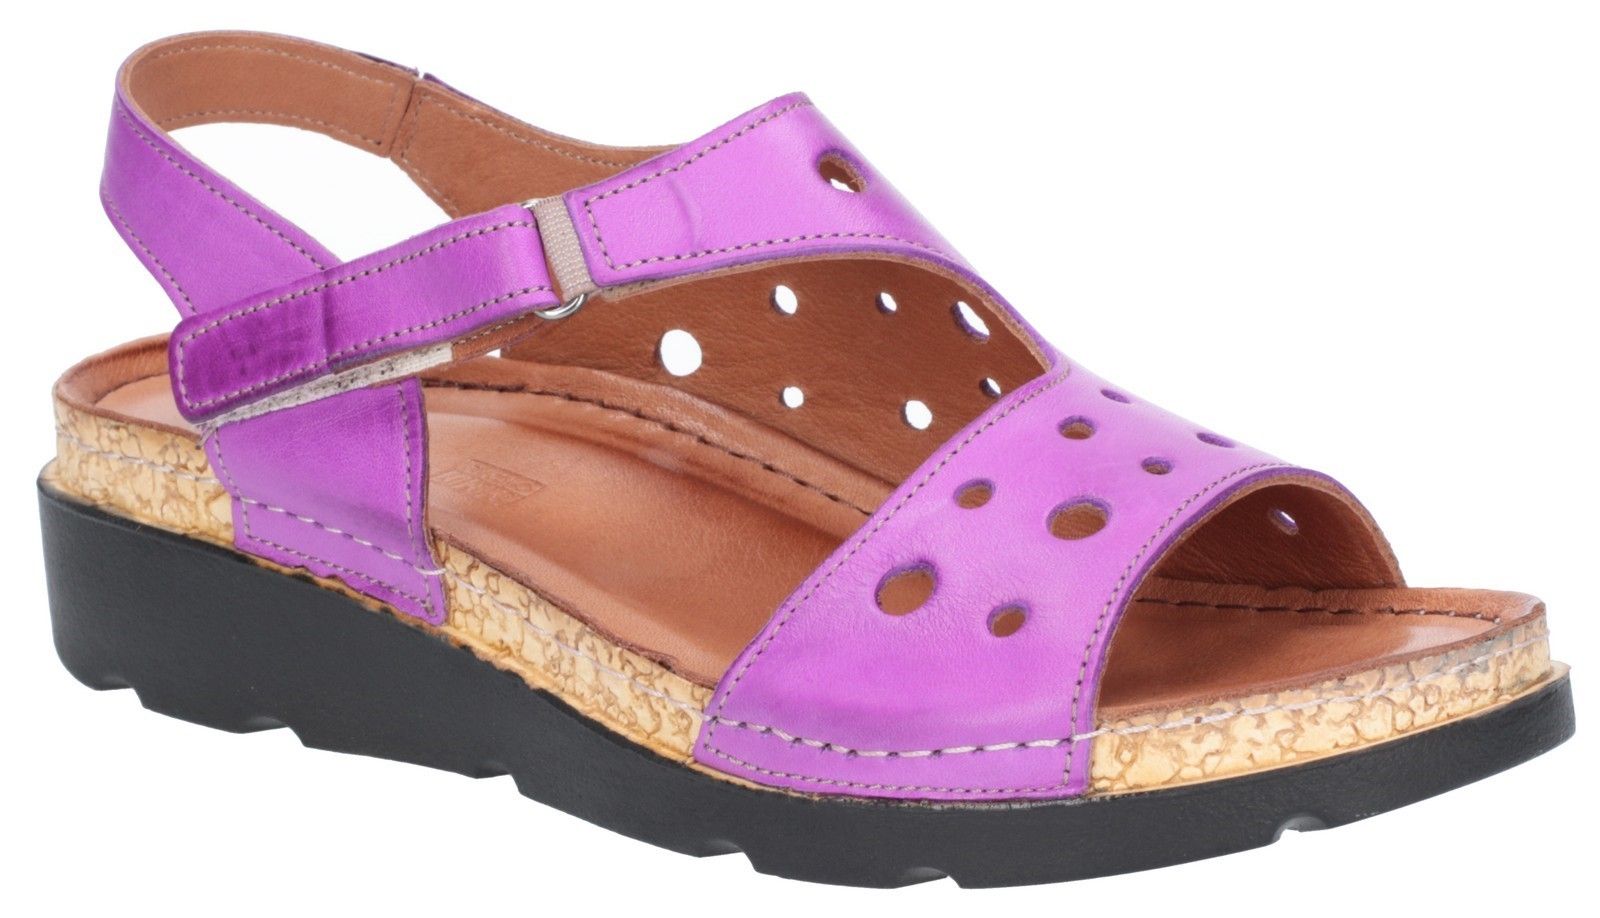 Off-duty sandal with asymmetric punched detail upper, comfortable open toe and sling back strap. A cork effect mid layer on the wedge platform rests a comfortable cushioned foot bed. Soft and supple leather uppers. 
Punched detailing. 
Open toe asymmetric design. 
Sling back strap with subtle elasticated panel. 
Adjustable touch fastening strap.